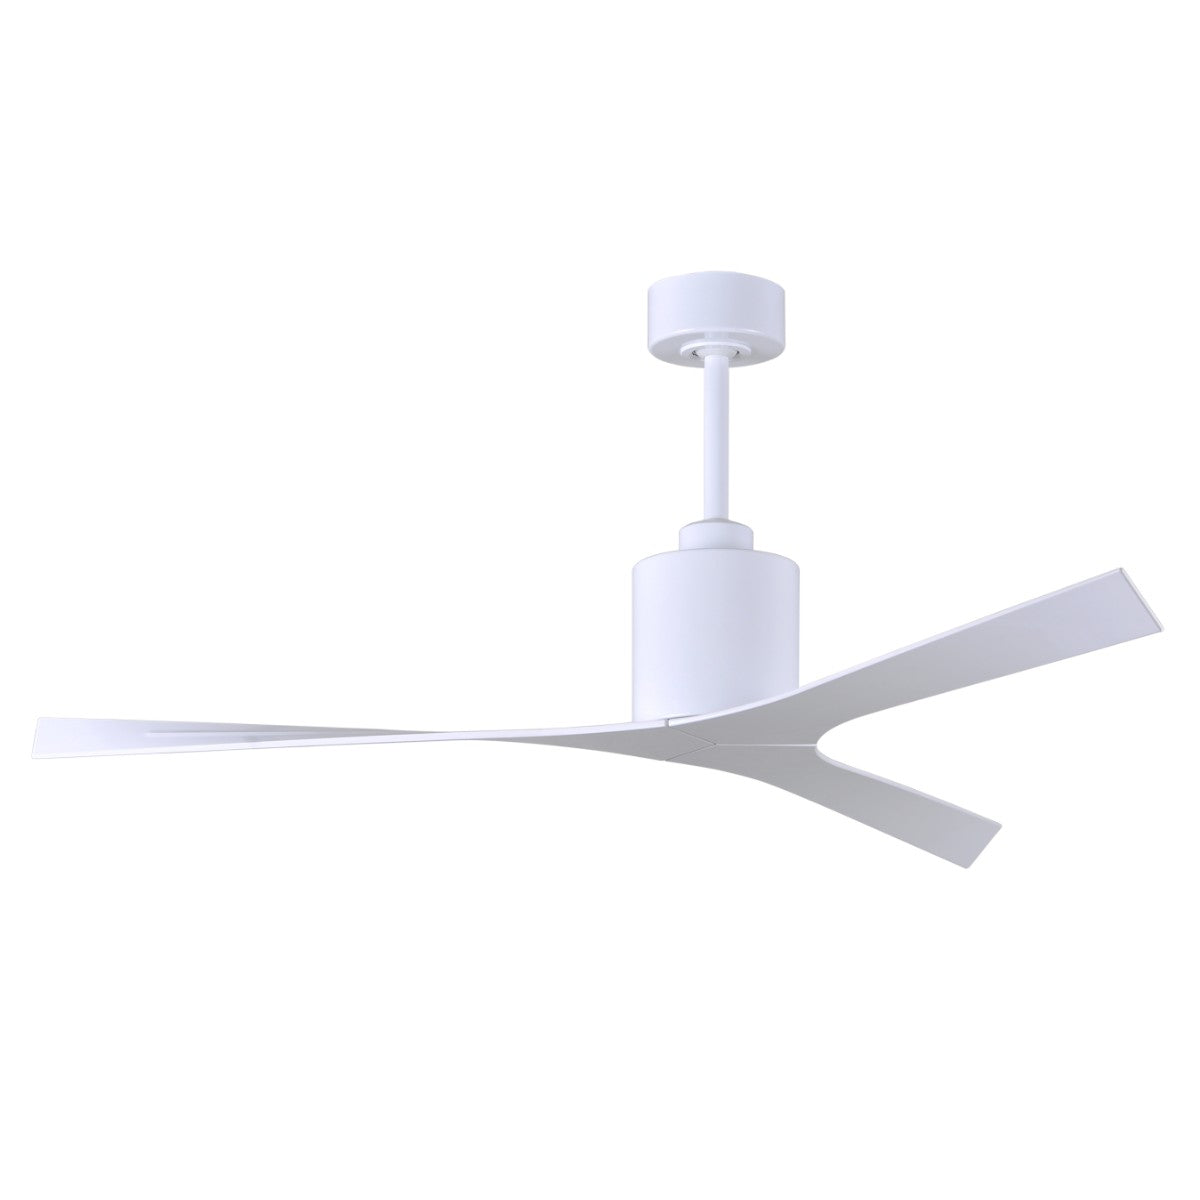 Molly 56 Inch Propeller Outdoor Ceiling Fan With Remote/Wall Control, Gloss White Finish - Bees Lighting